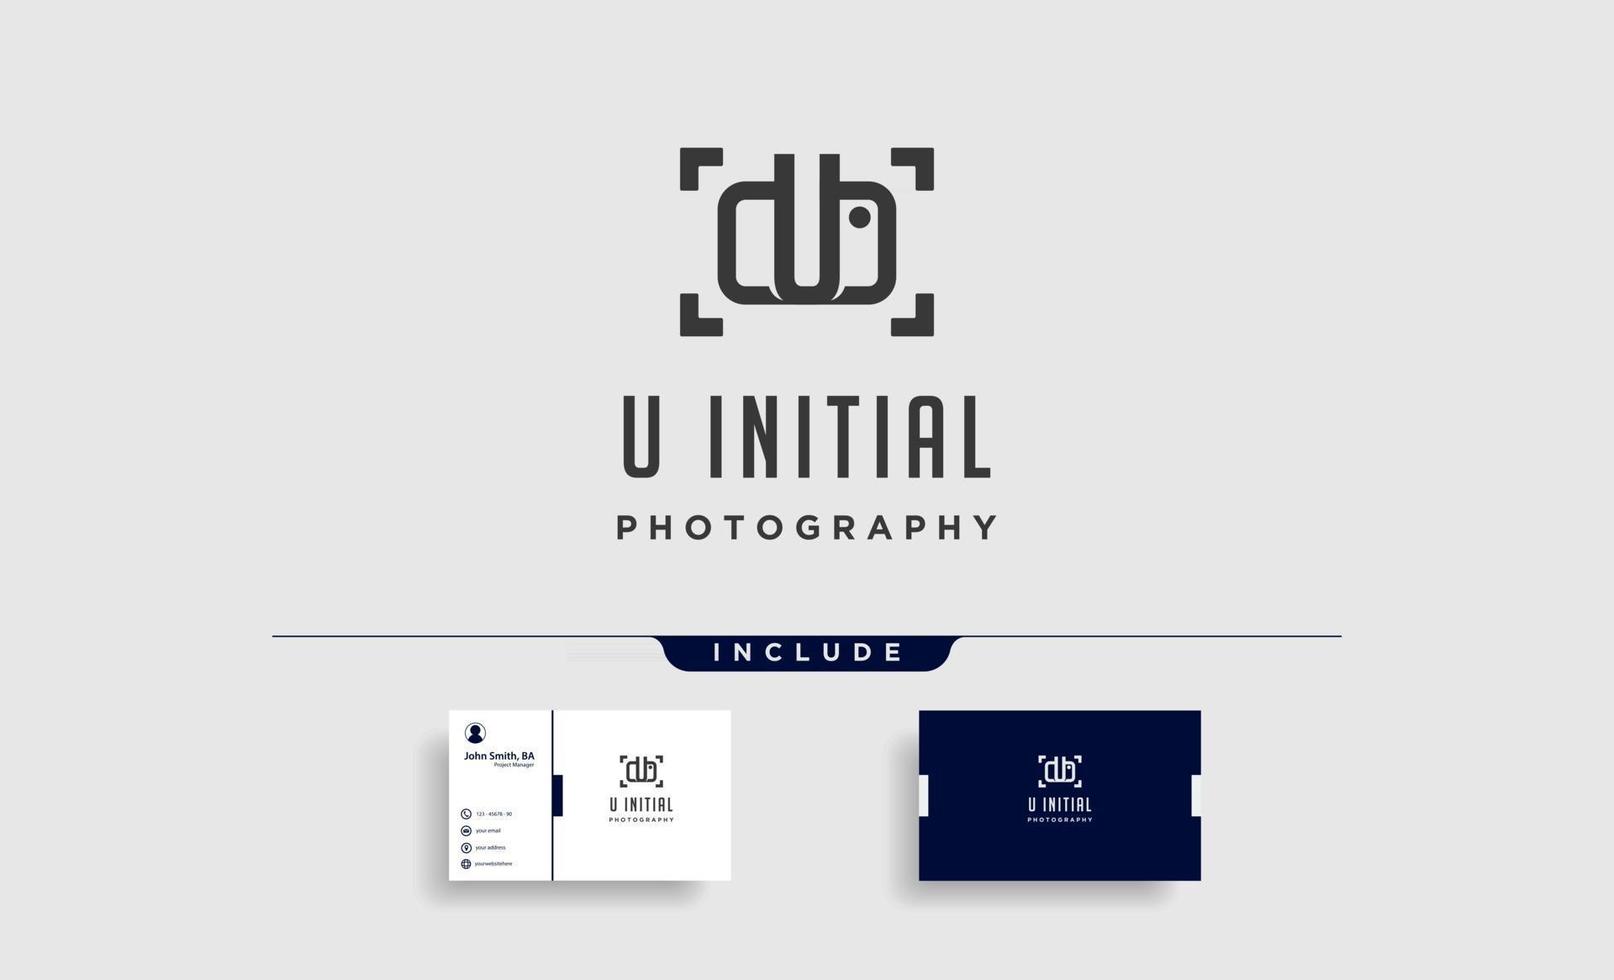 U initial photography logo template vector design icon element